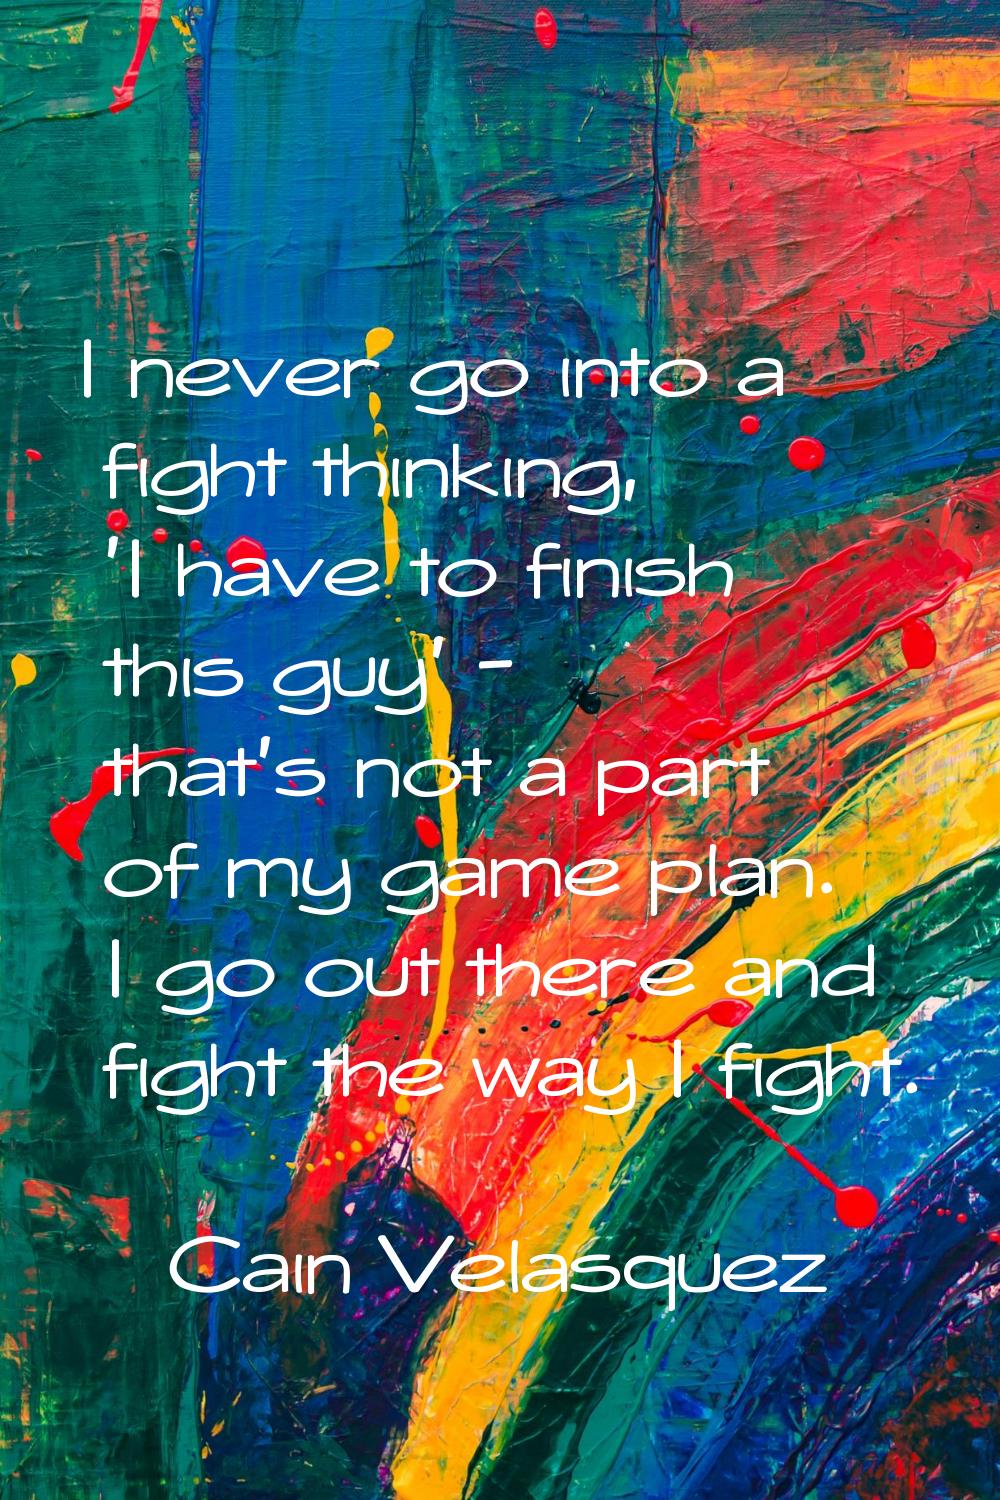 I never go into a fight thinking, 'I have to finish this guy' - that's not a part of my game plan. 